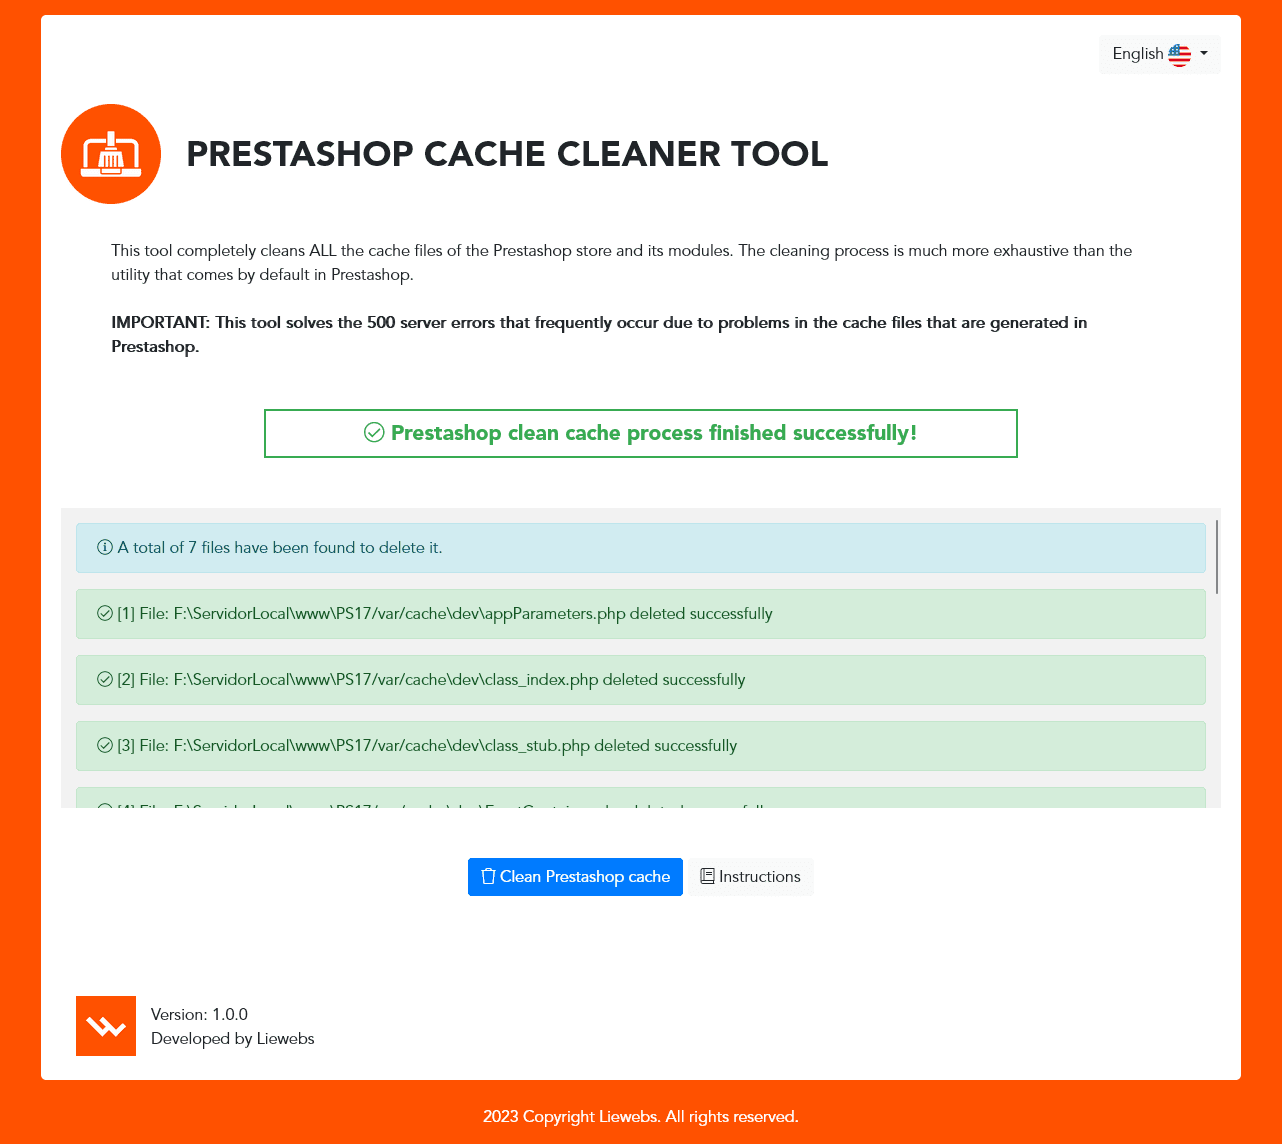 Prestashop Cache Cleaner Tool (Cleans Prestashop cache and fixes error 500 when trying to access the Back-office)